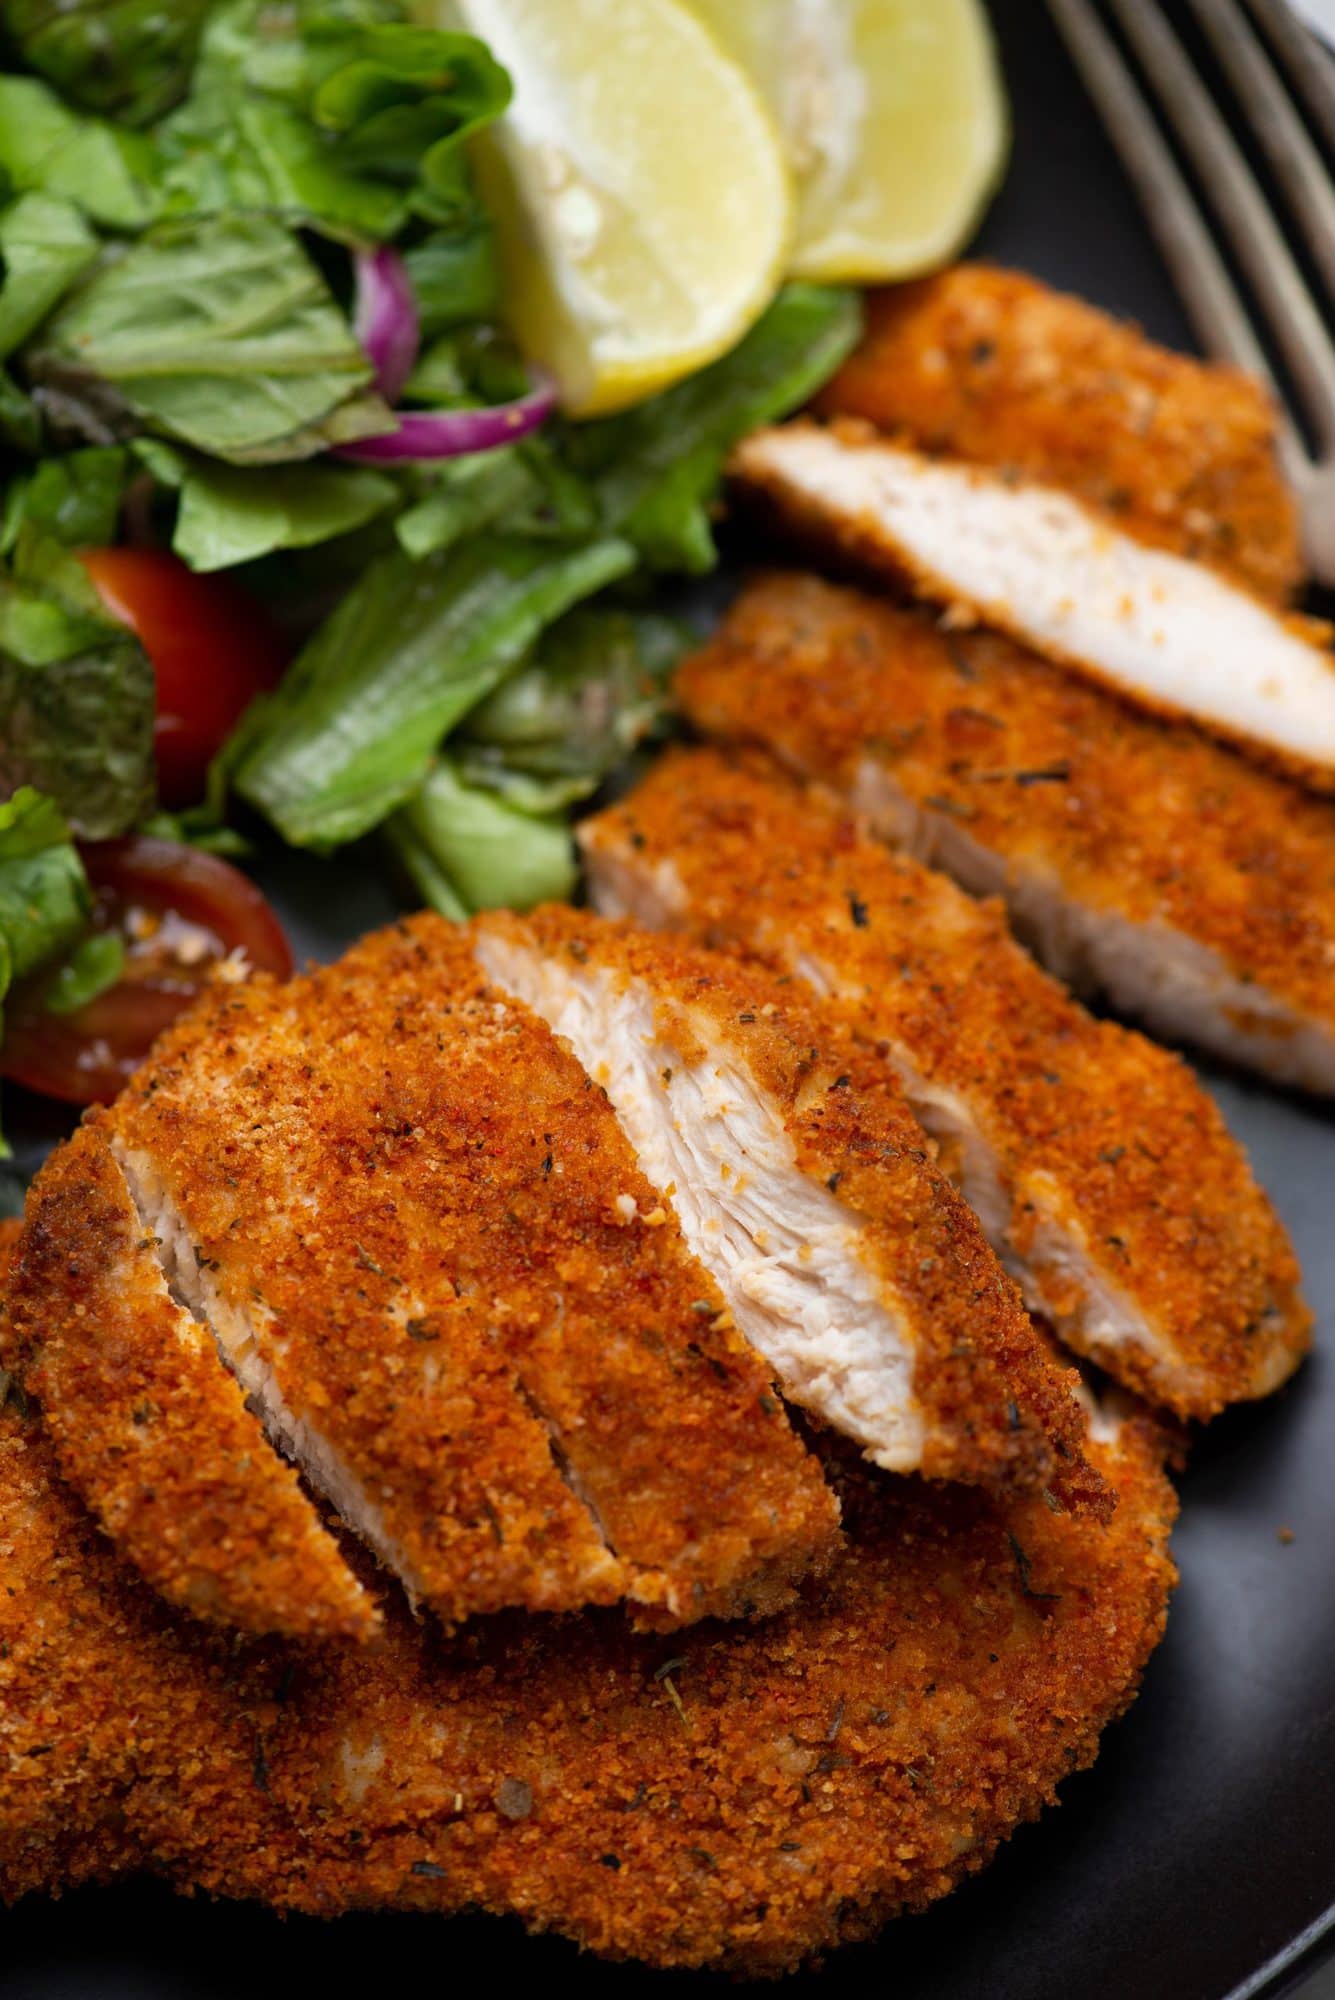 https://theflavoursofkitchen.com/wp-content/uploads/2022/03/Air-Fryer-Cripsy-Chicken-Breast-4-scaled.jpg